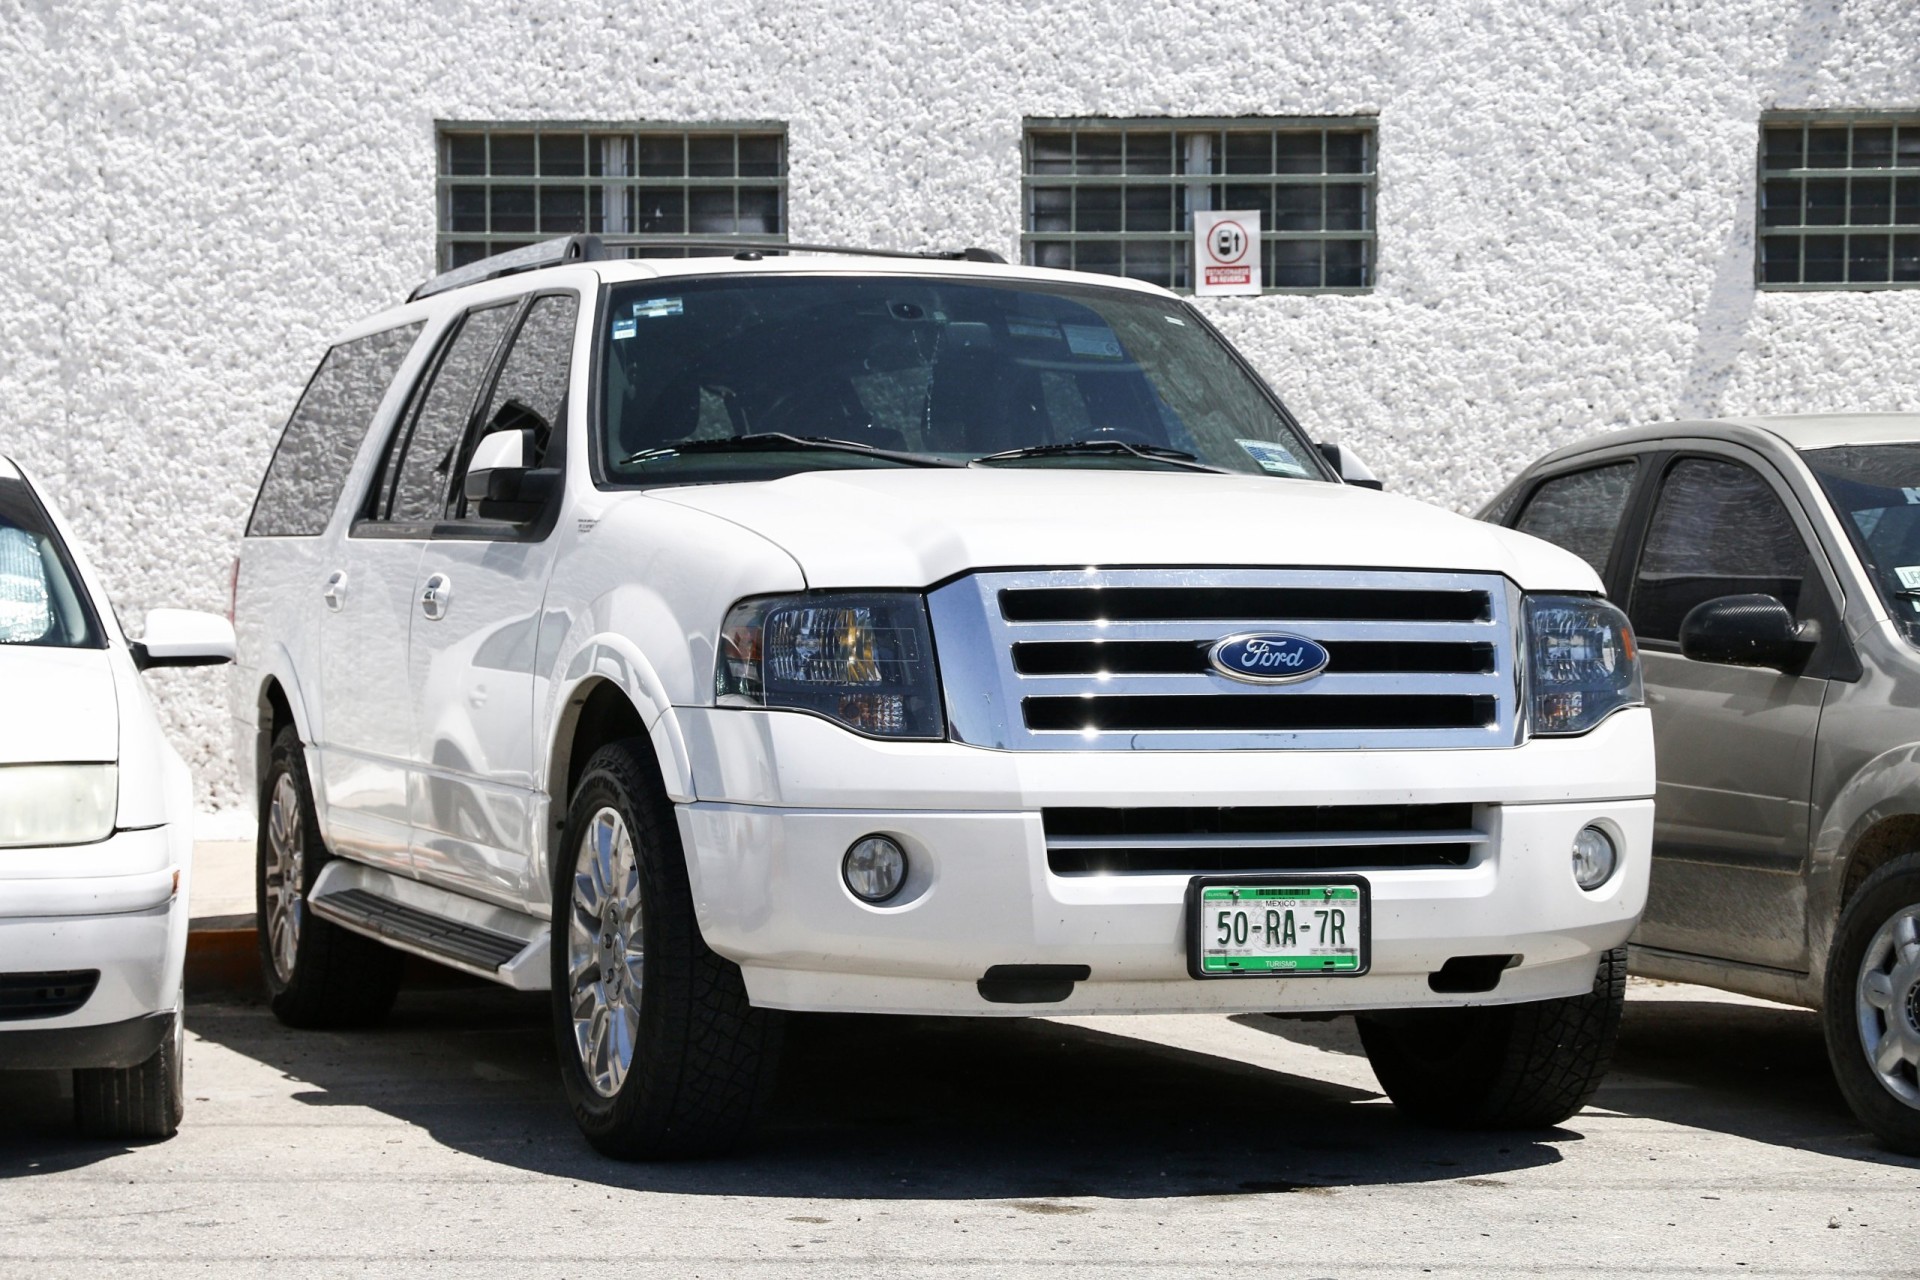 2012 White Ford Expedition in a parking lot